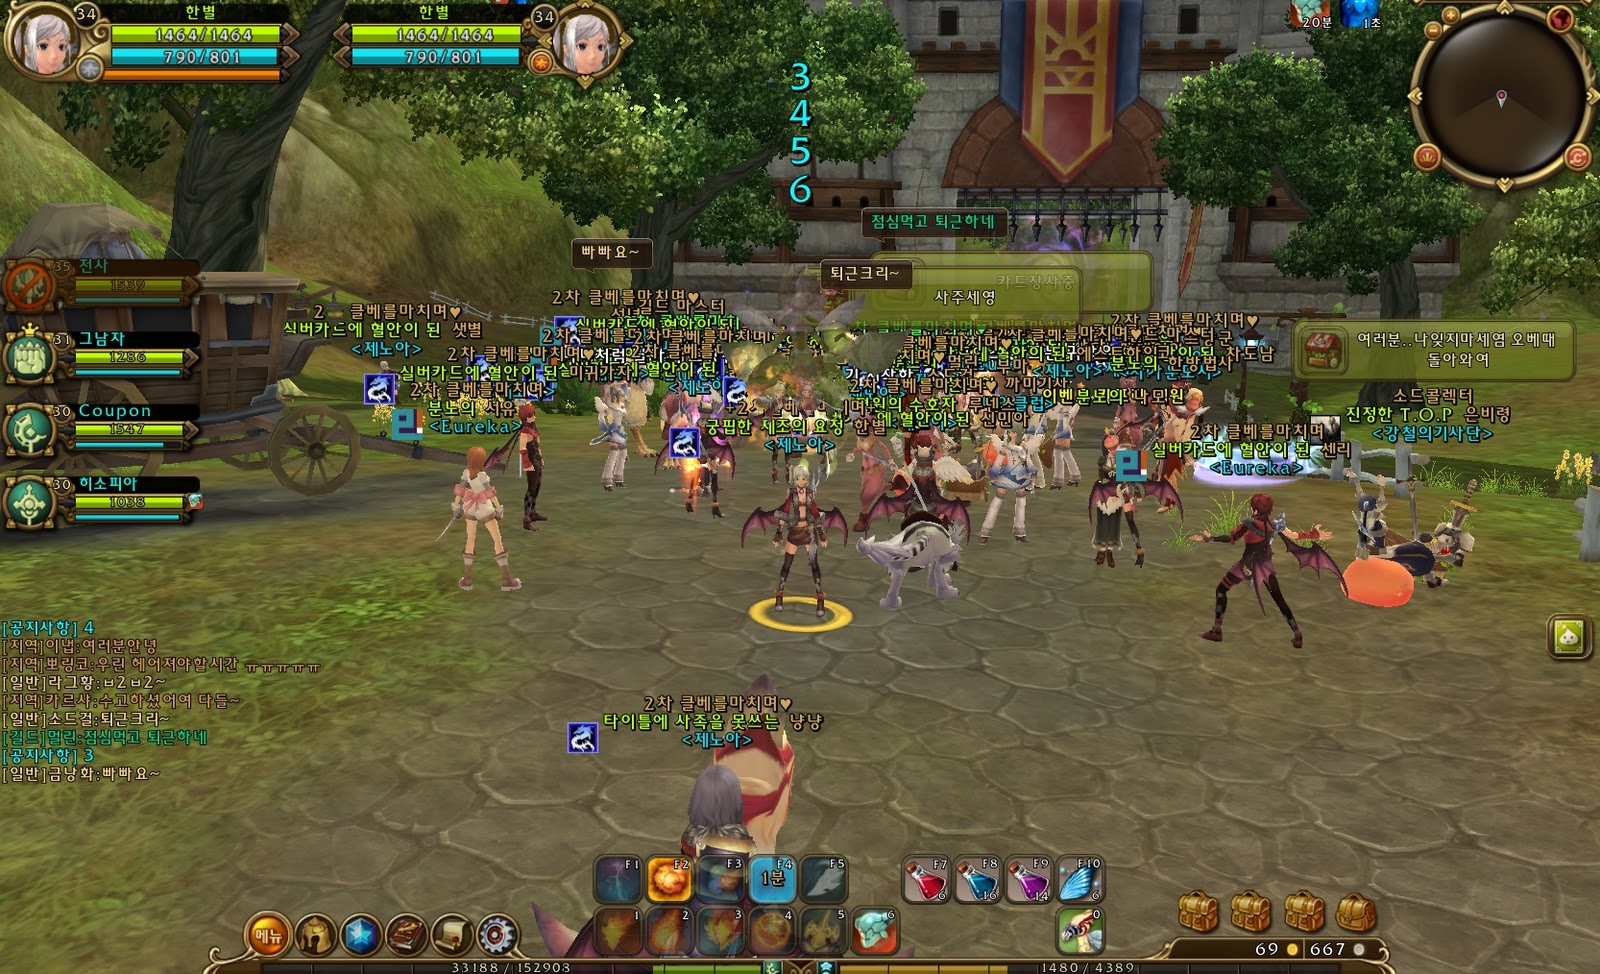 Ragnarok Online 2 - Limited Edition Test announced - MMO Culture